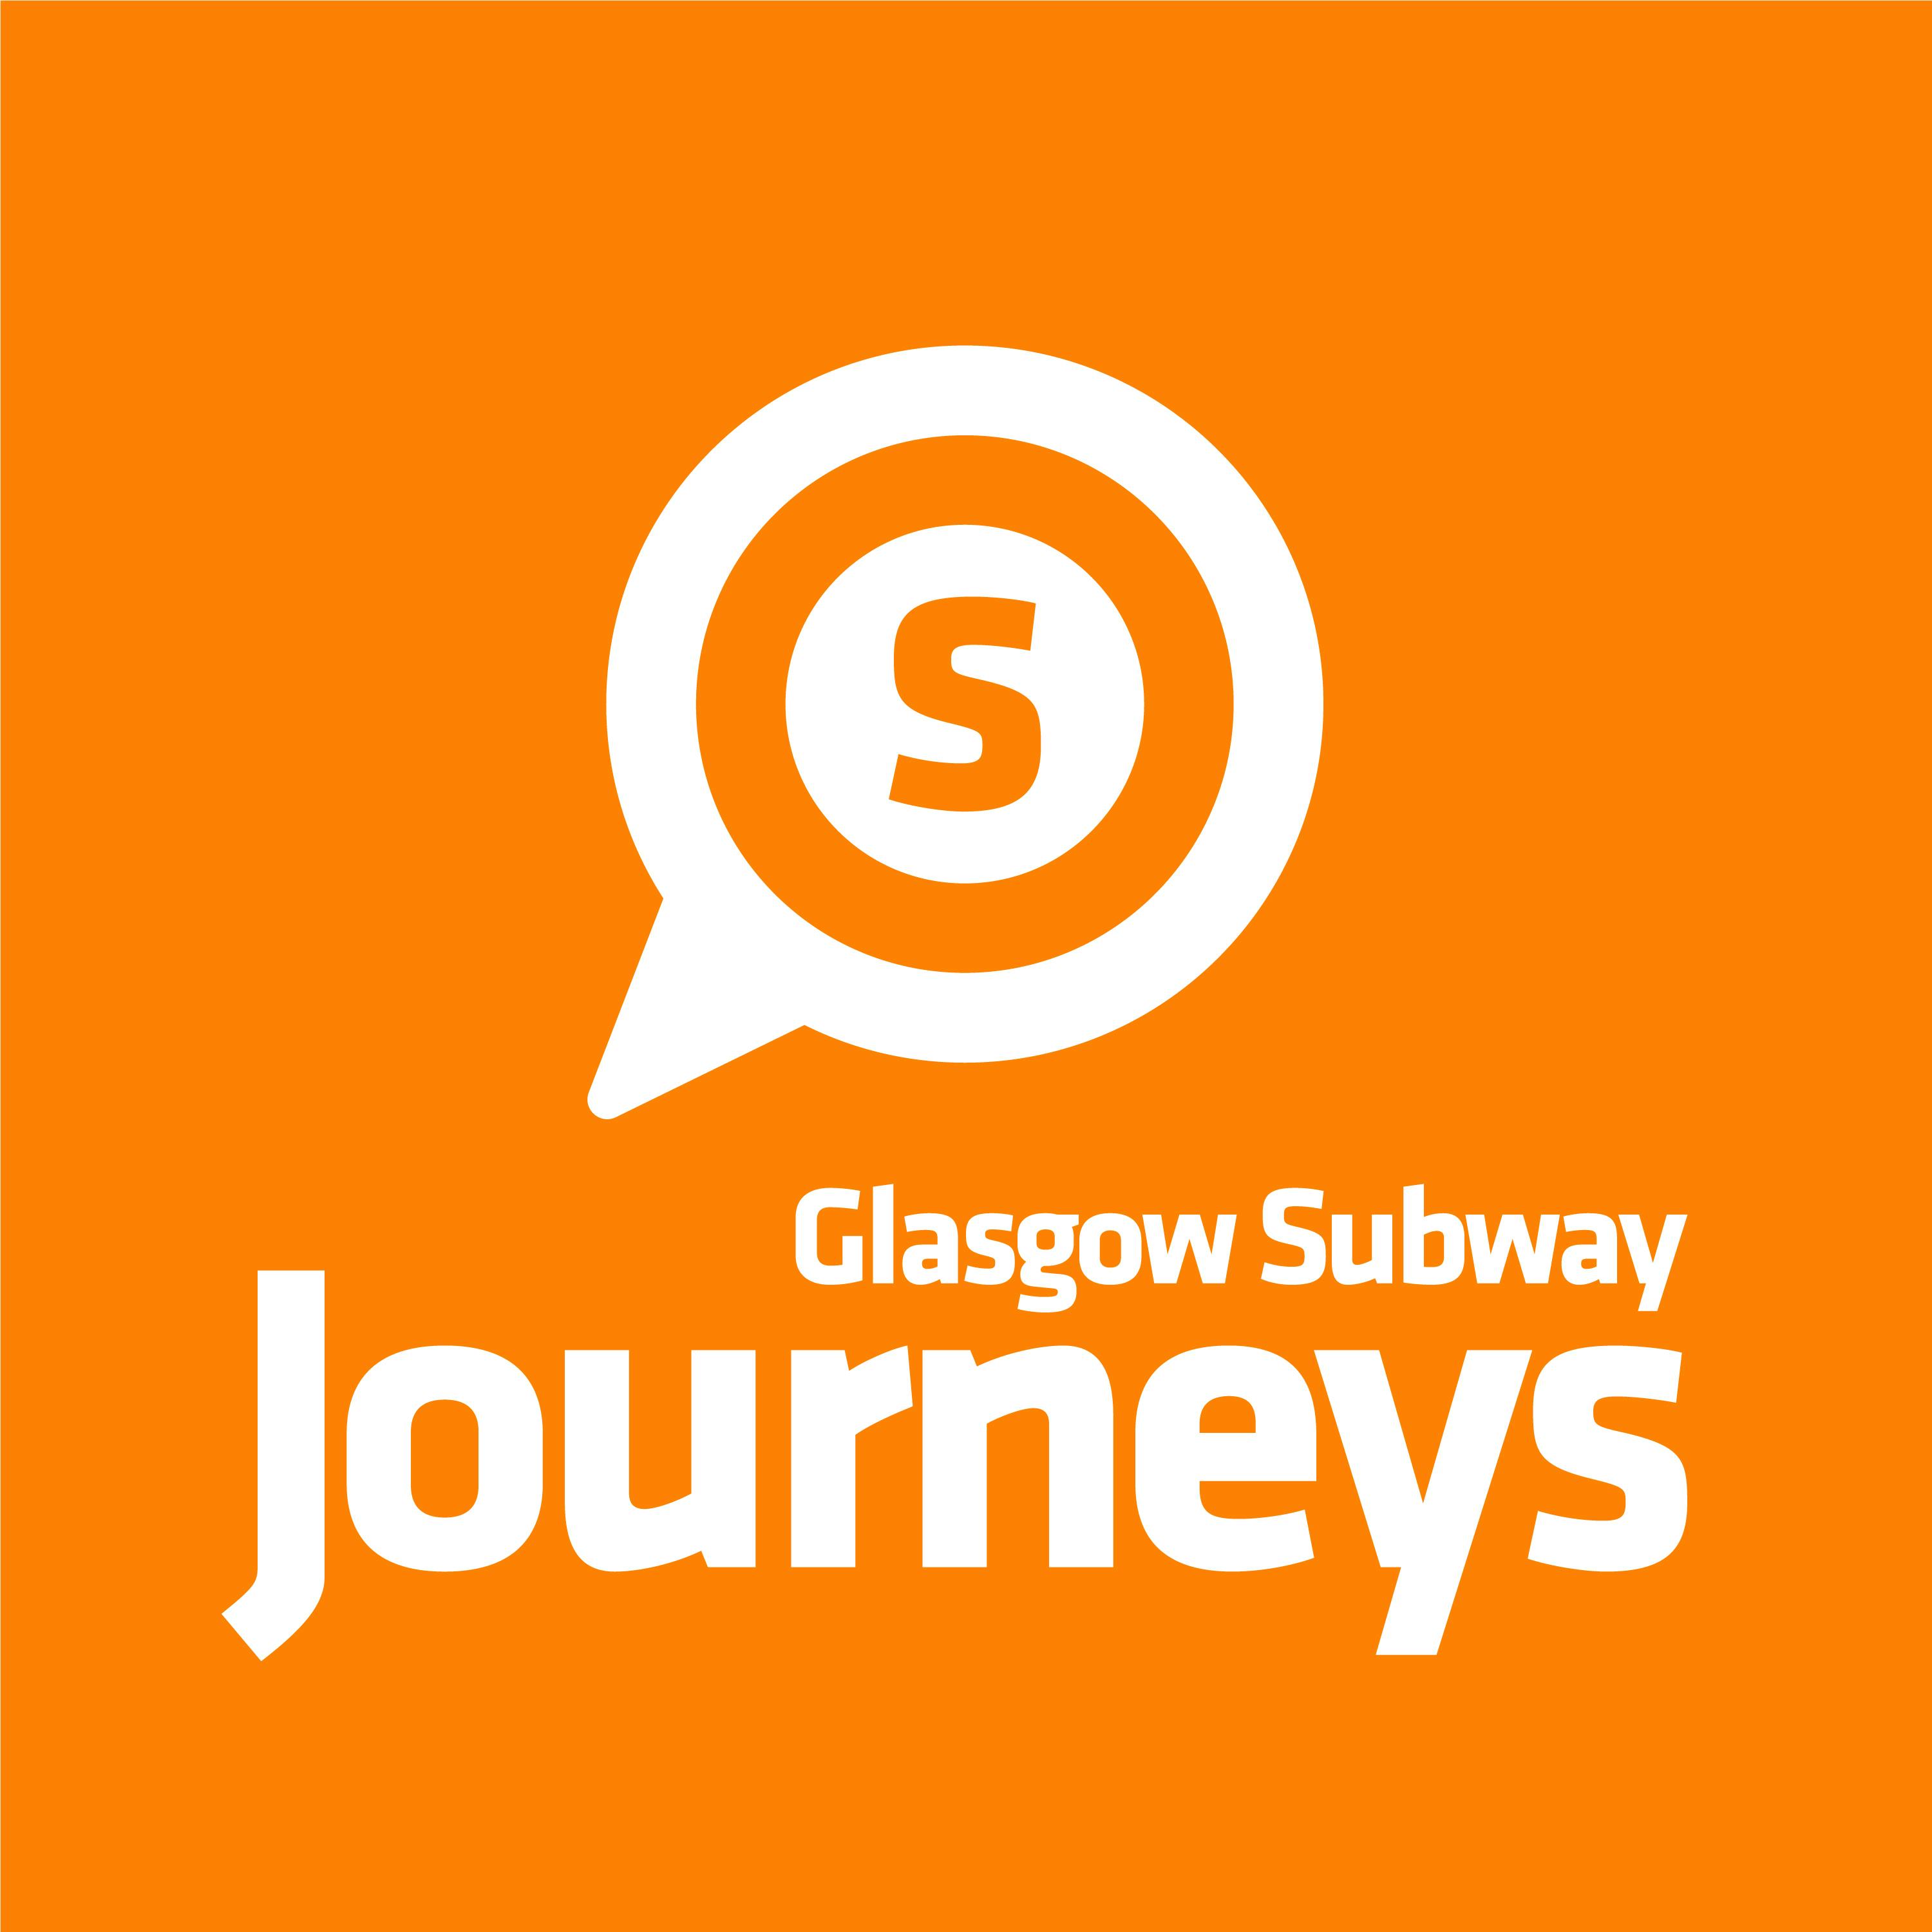 Glasgow Subway Today: The People